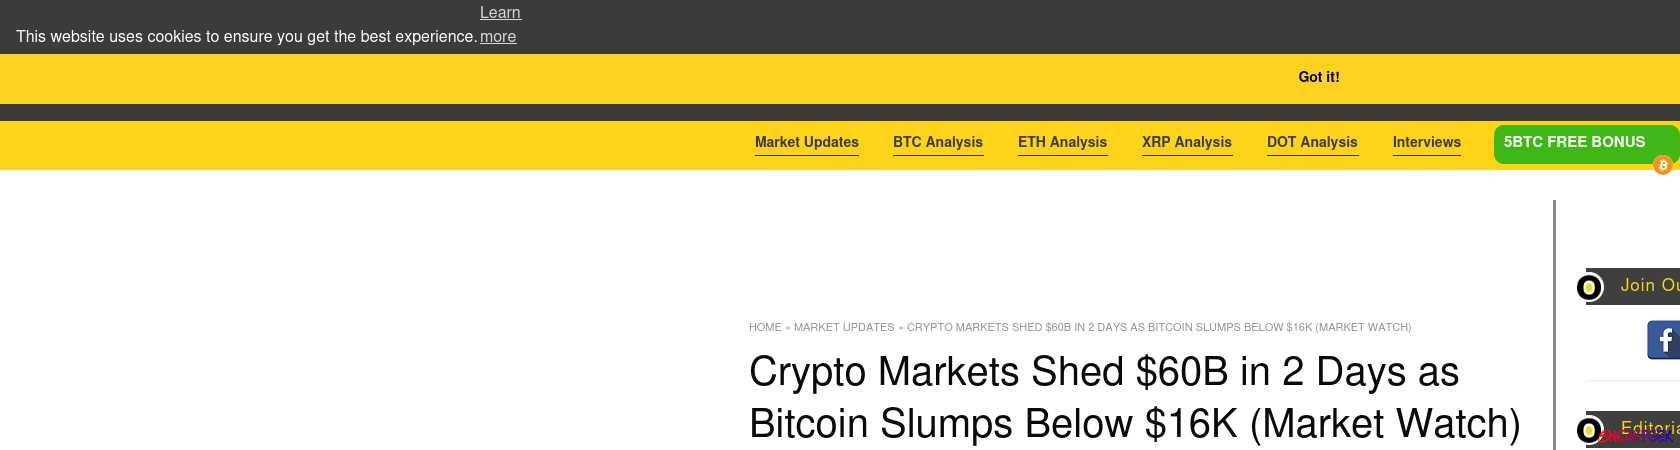 Read the full Article:  ⭲ Crypto Markets Shed $60B in 2 Days as Bitcoin Slumps Below $16K (Market Watch)